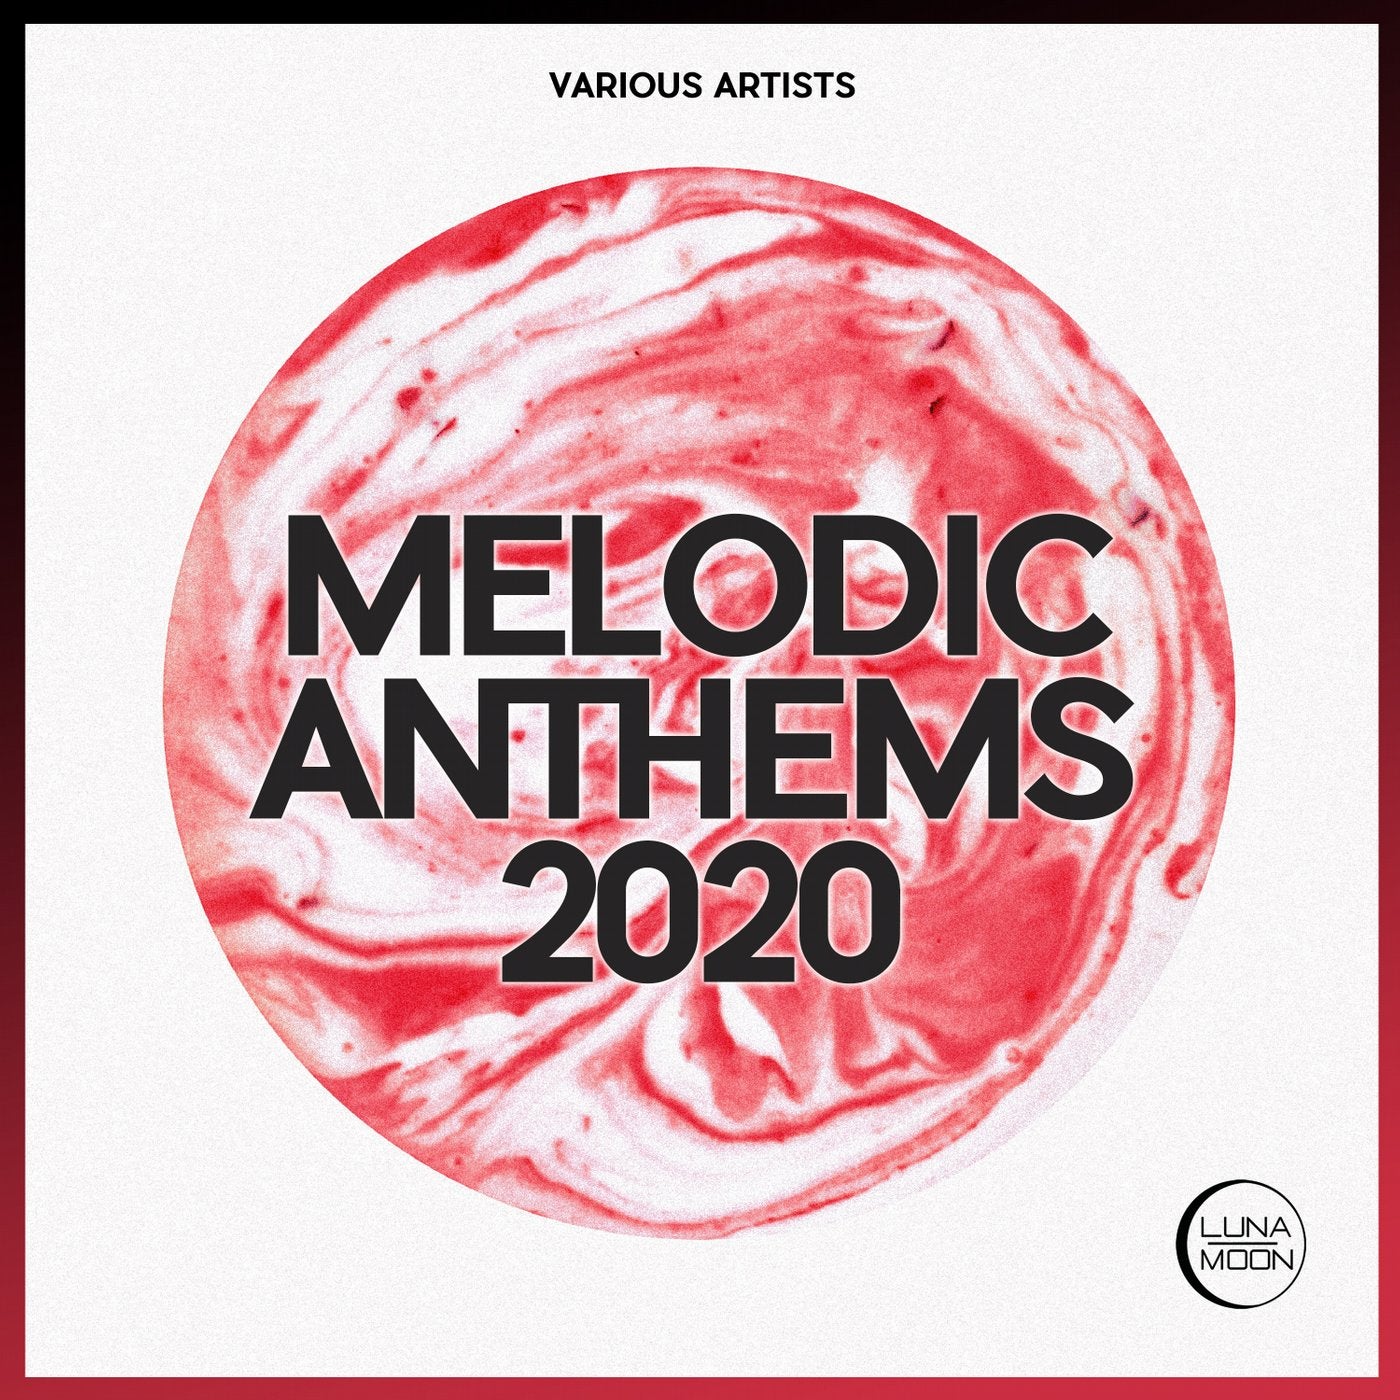 Melodic Anthems 2020